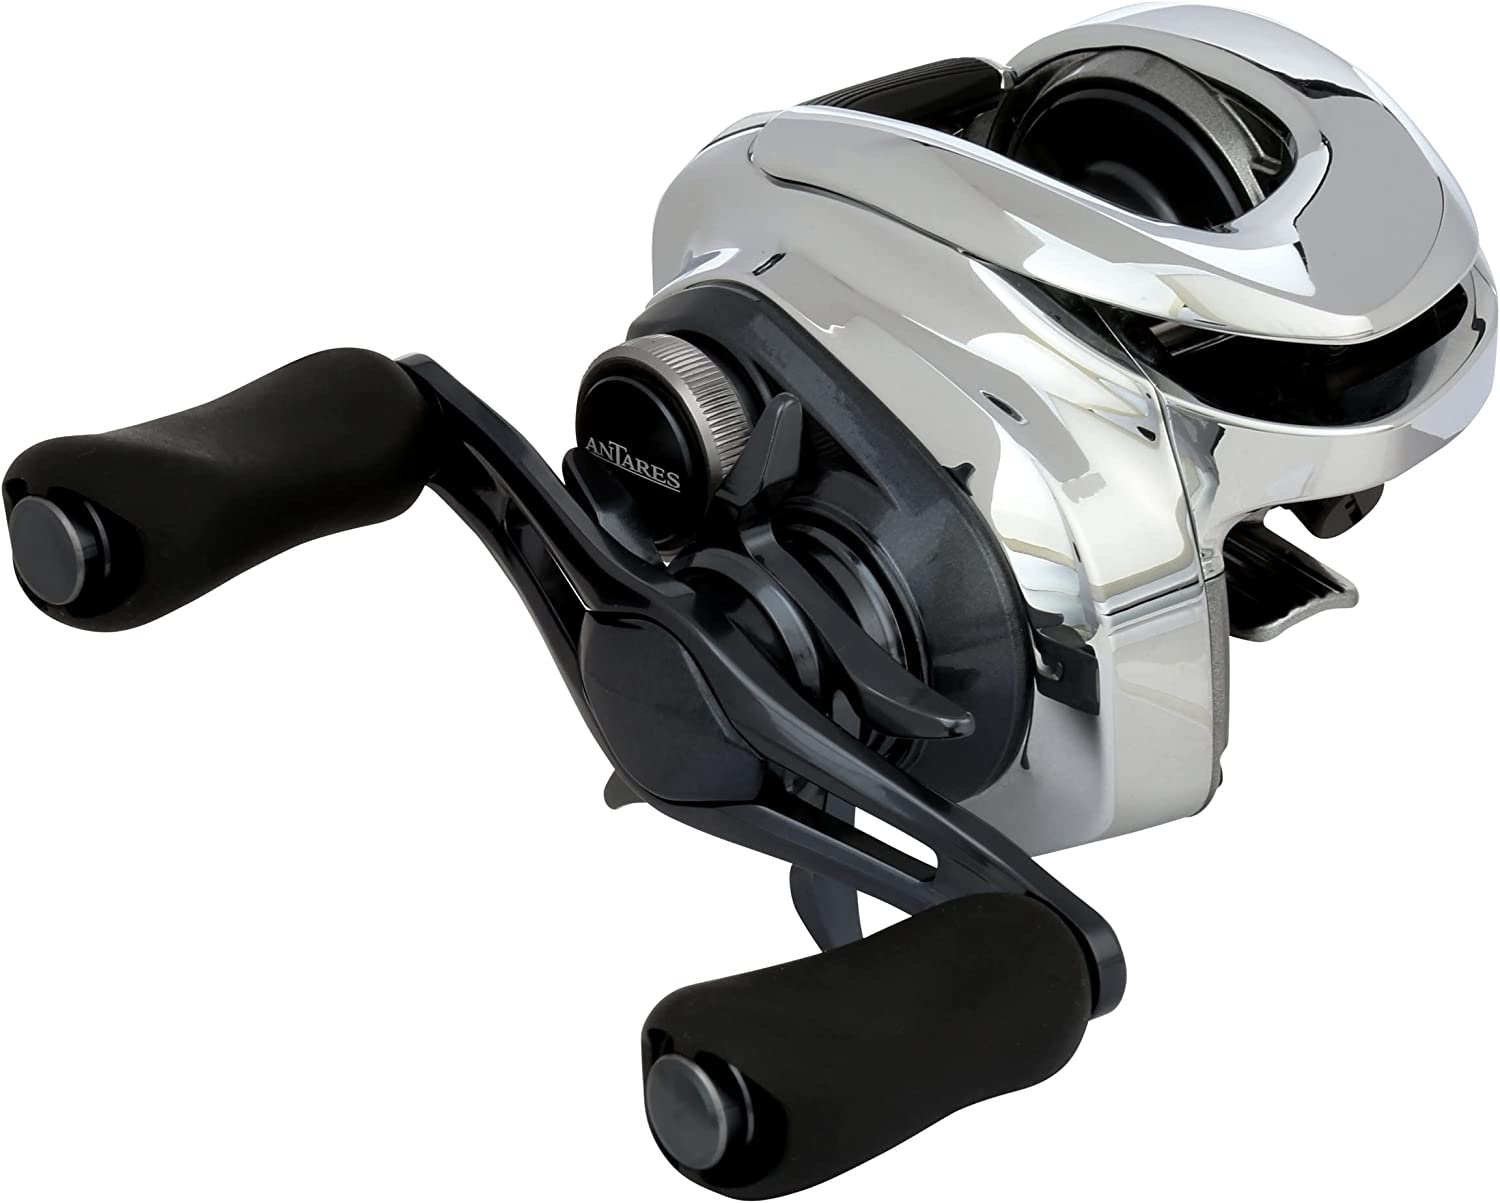 Shimano Antares A - Best Shimano Baitcaster For Casting Distances

Price: $649.99